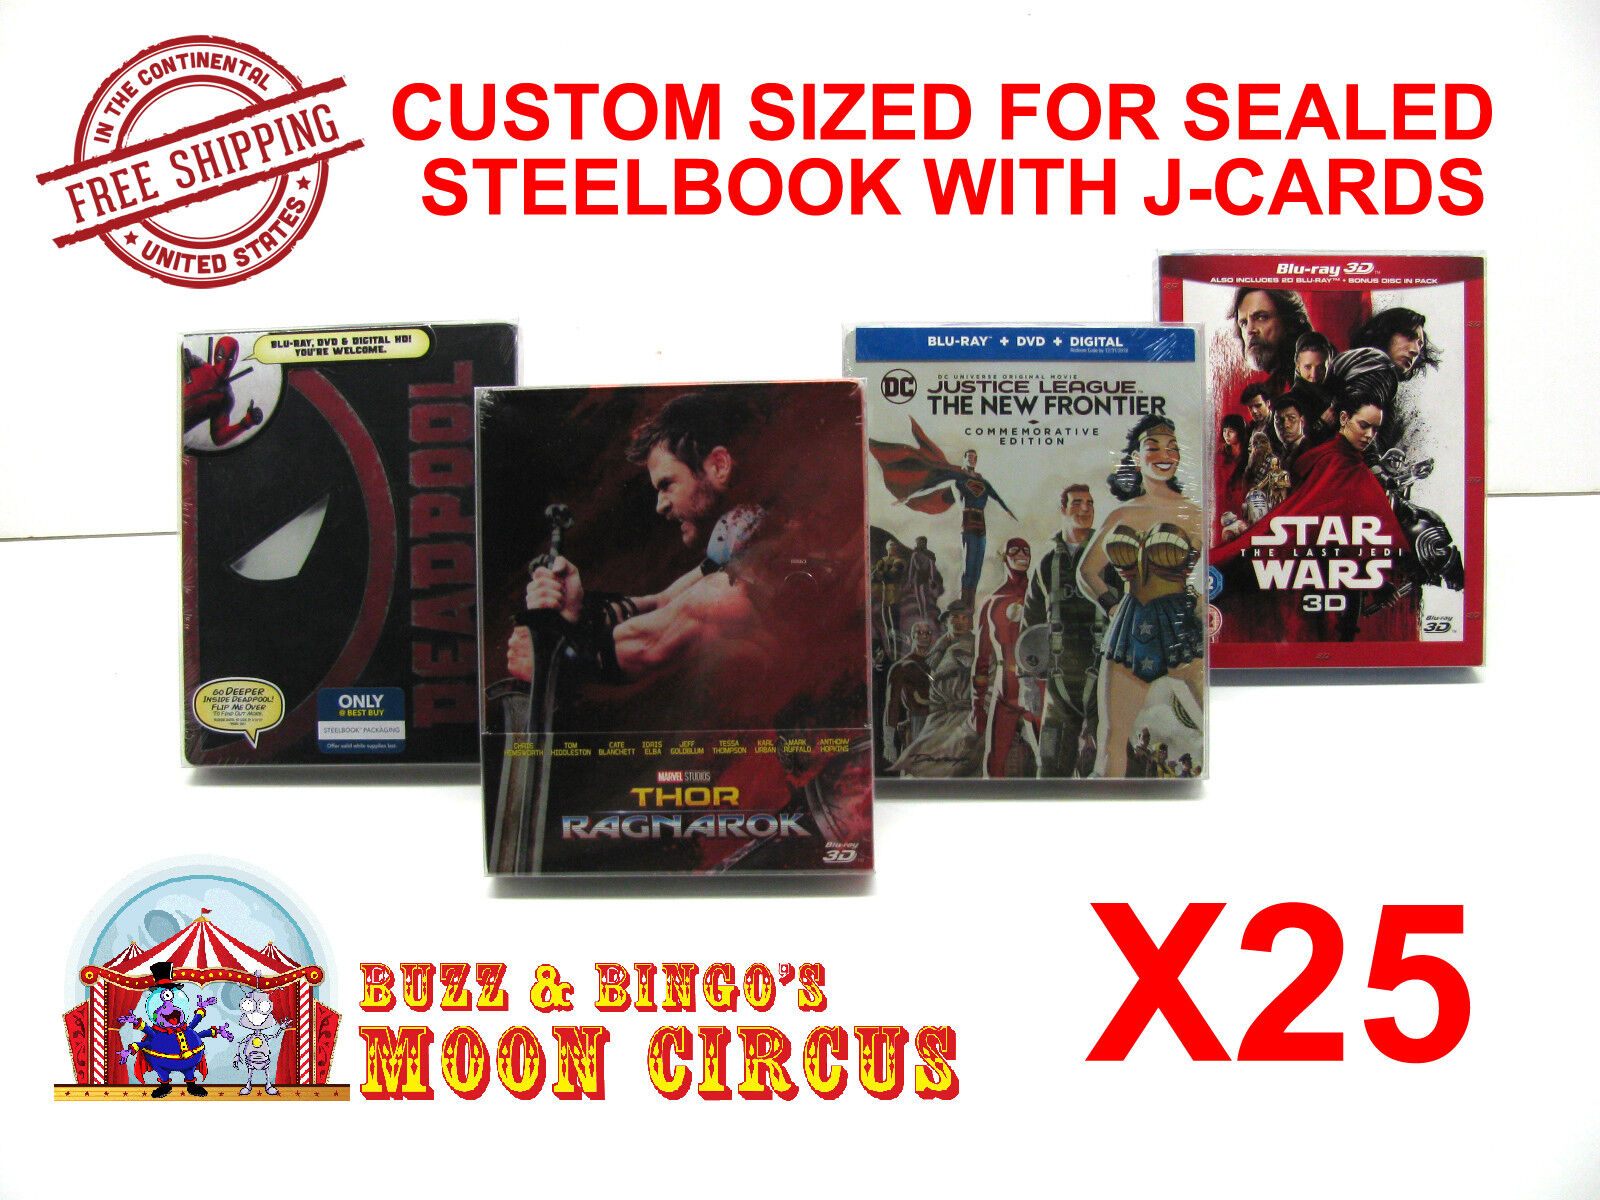 25x BLU-RAY STEELBOOK WITH J-CARDS (SIZE BR5) - CLEAR PLASTIC BOX PROTECTORS  Dr. Retro Does Not Apply